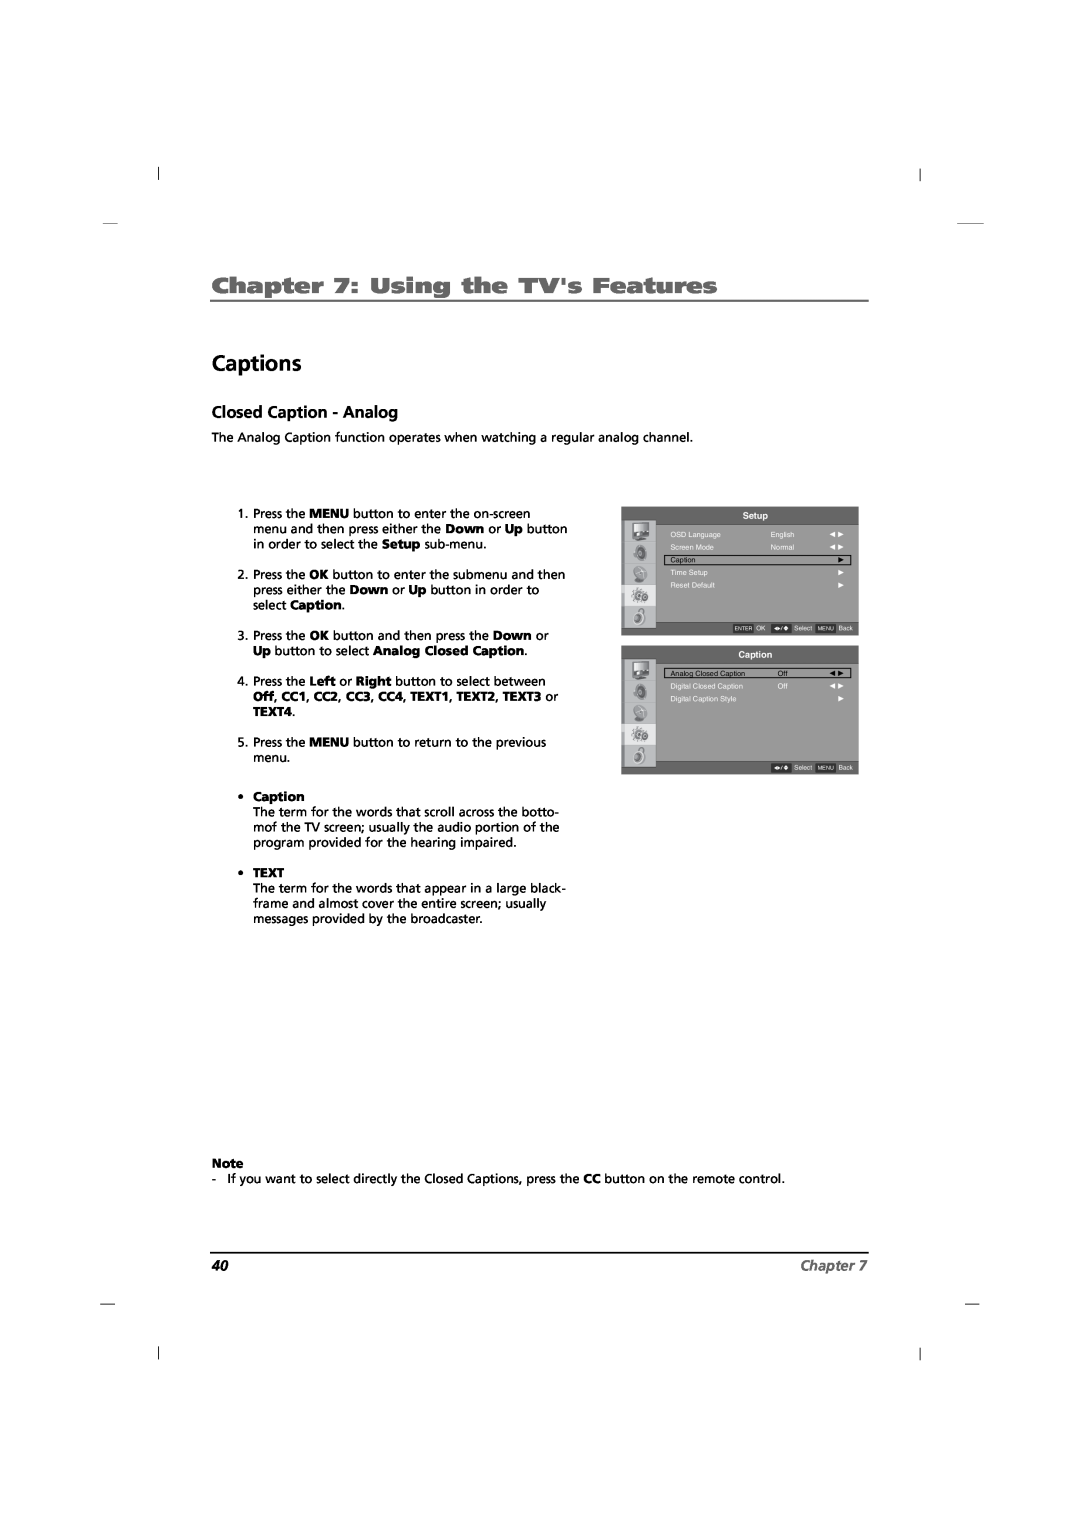 RCA J12H770 manual Captions, Closed Caption - Analog, Using the TVs Features, Chapter 